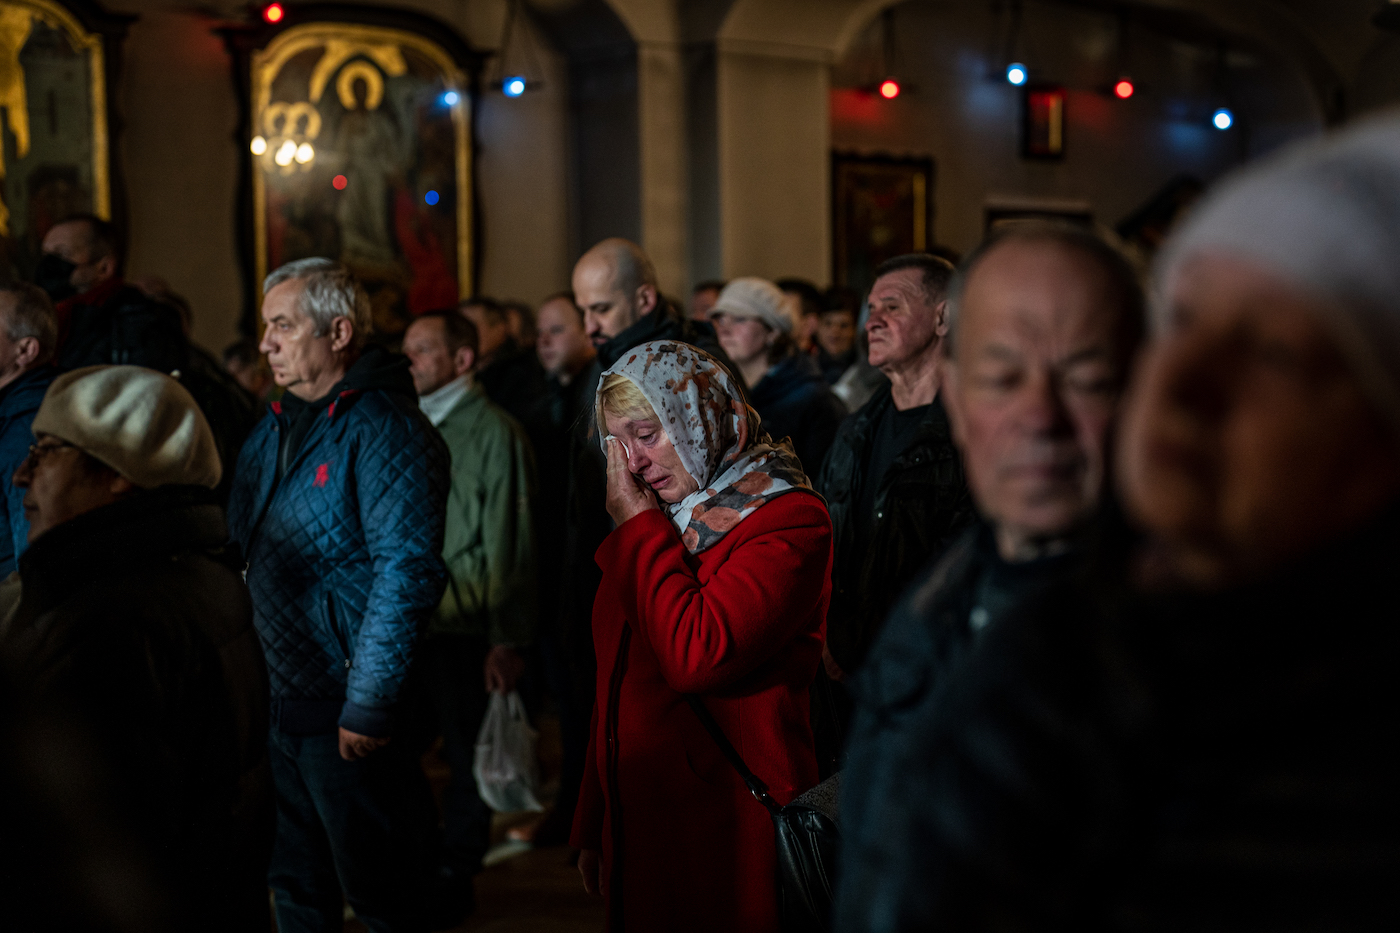 A woman cries in the church service on Easter Sunday in Bucha, Ukraine on April 24, 2022. Wolfgang Schwan - Anadolu Agency